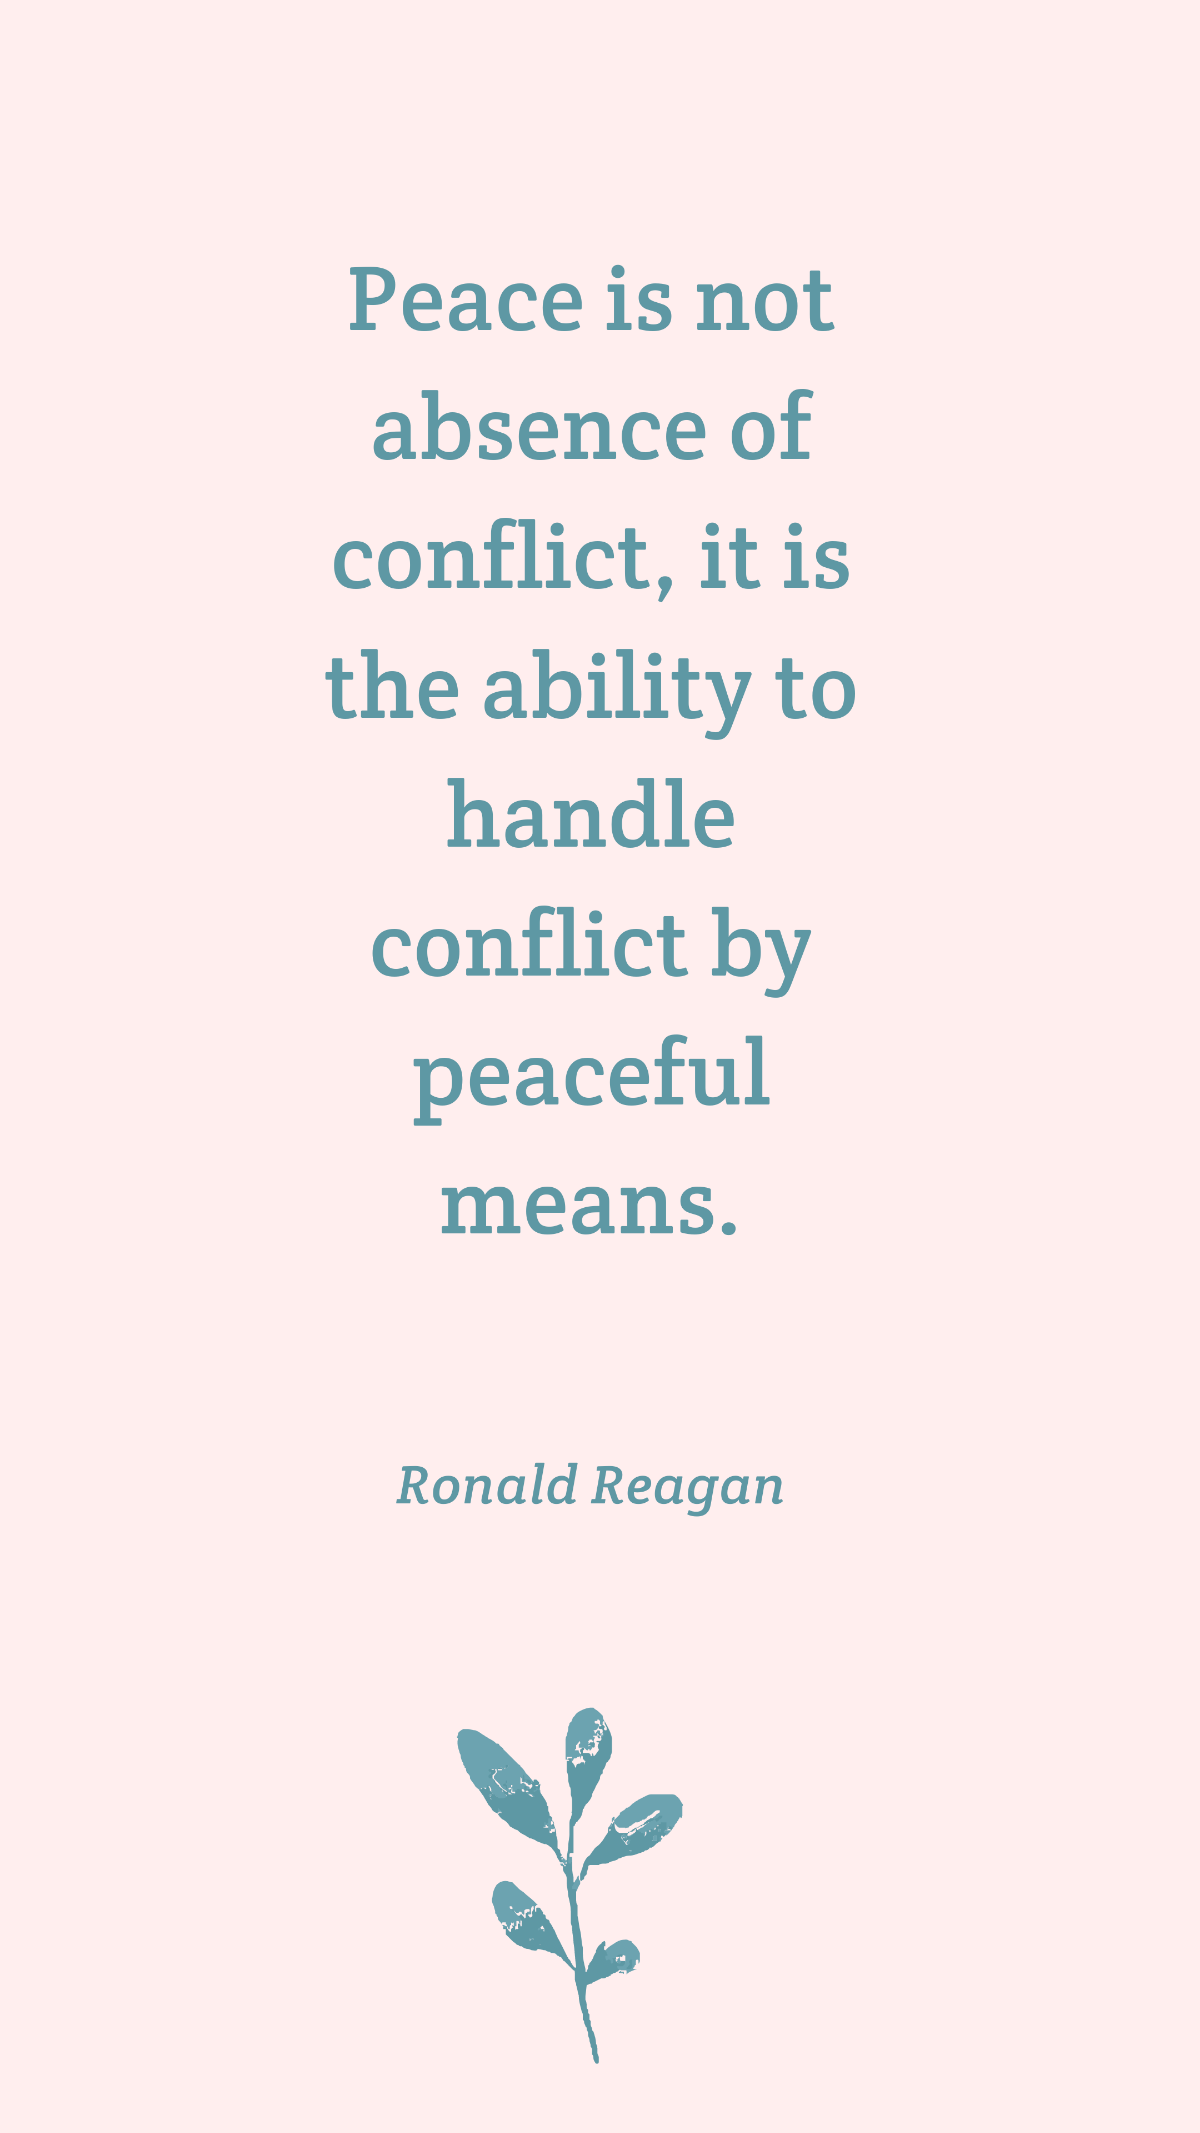 Ronald Reagan - Peace is not absence of conflict, it is the ability to handle conflict by peaceful means. 